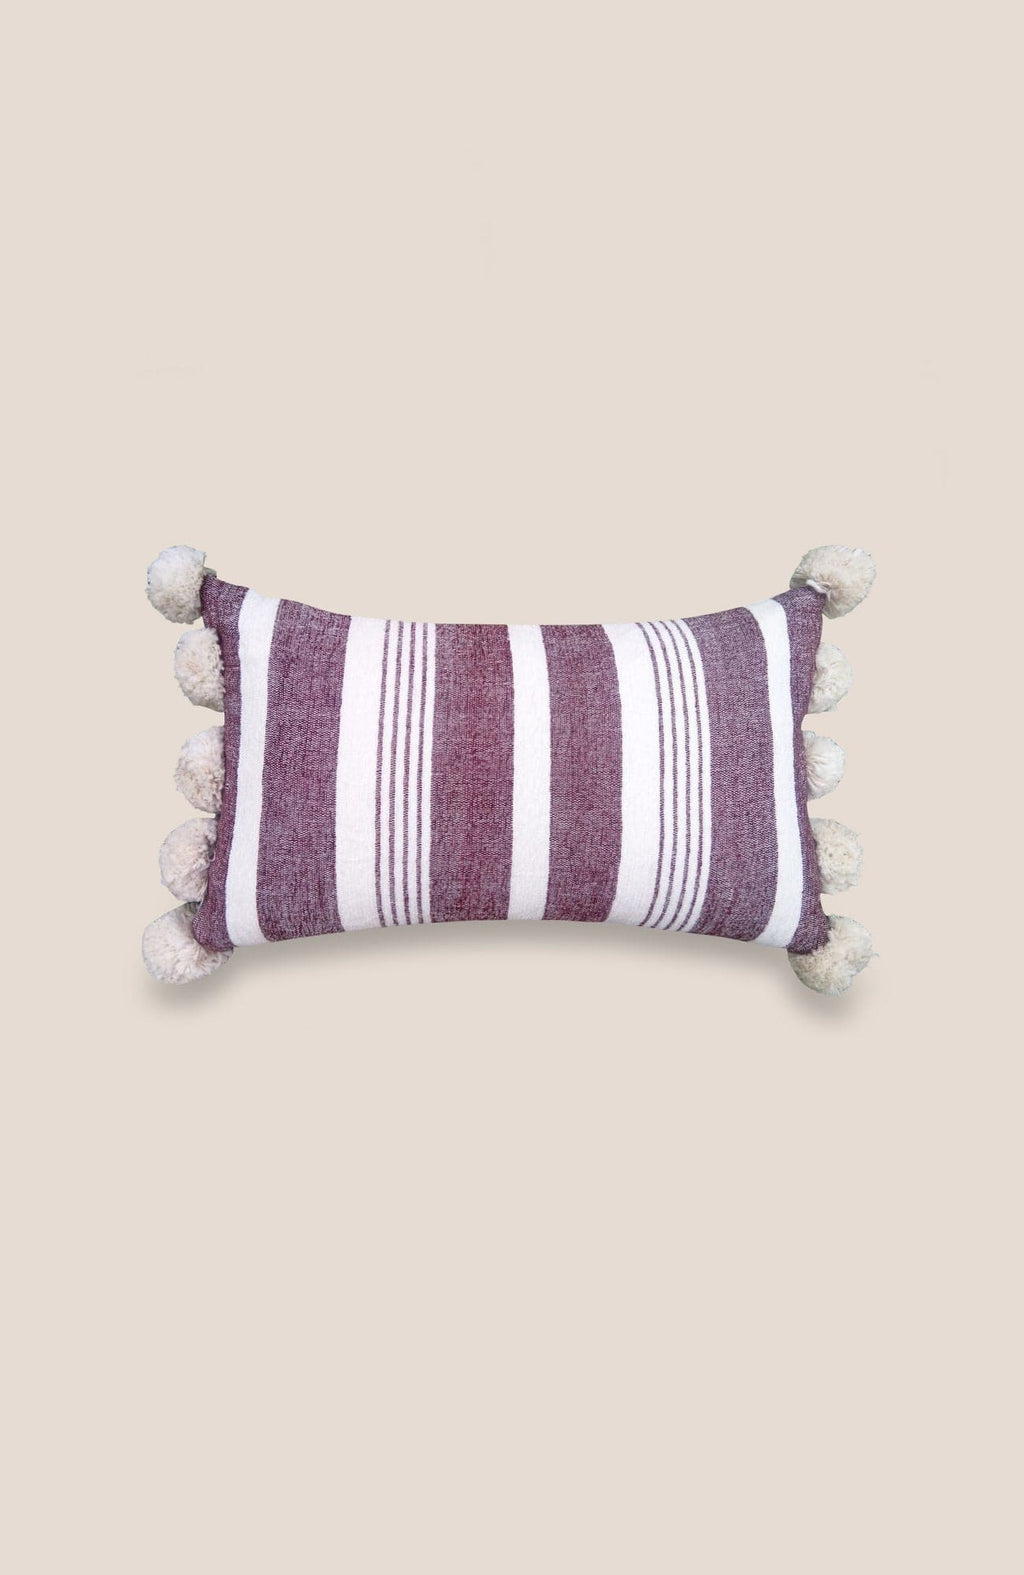 Pompon Pillow Cover Ray - Home Decor | Shop Baskets, Ceramics, Pillows, Rugs & Wall Hangs online